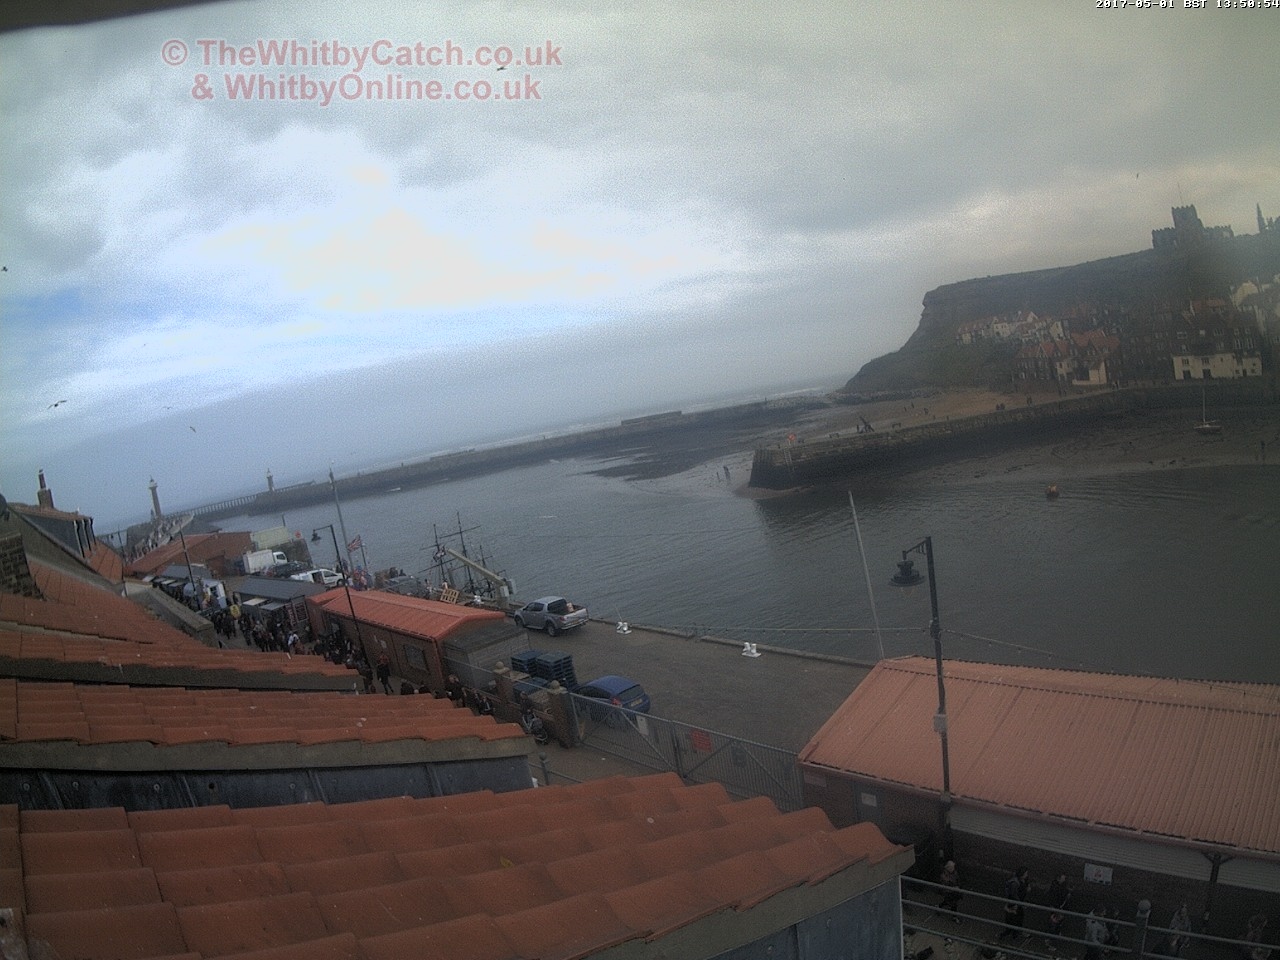 Whitby Mon 1st May 2017 13:51.